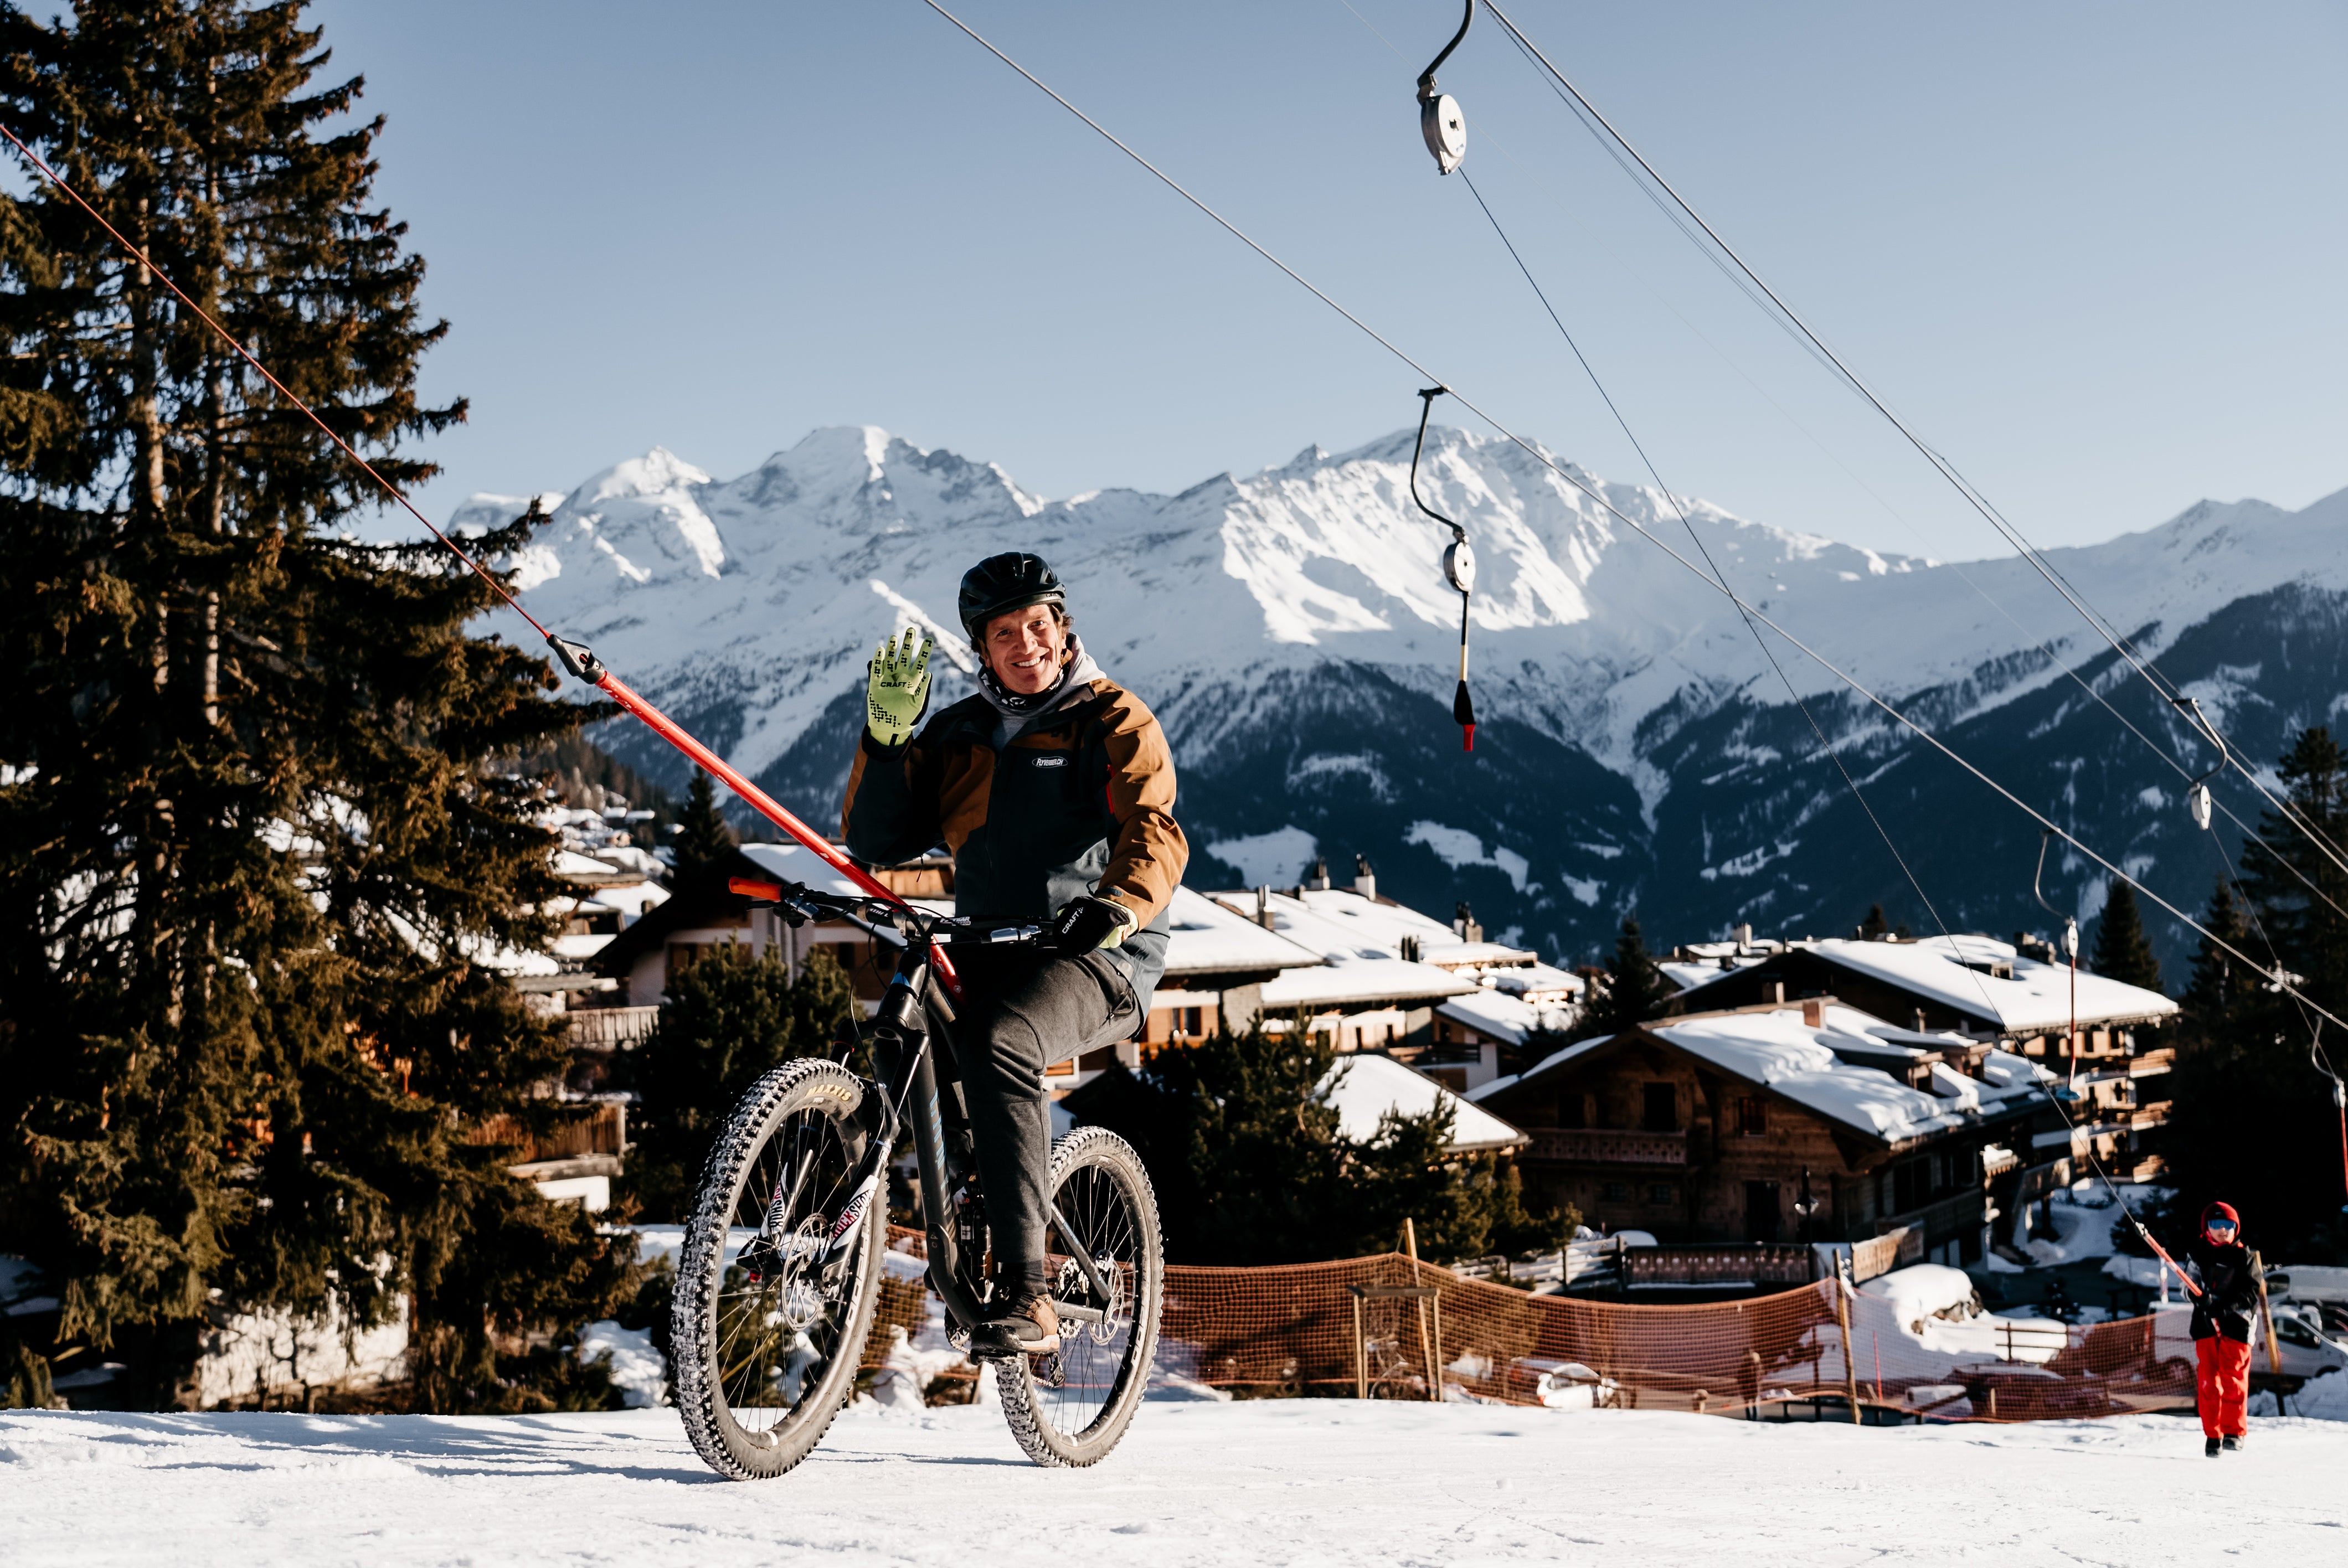 The Dual Slalom snowbike sessions are back